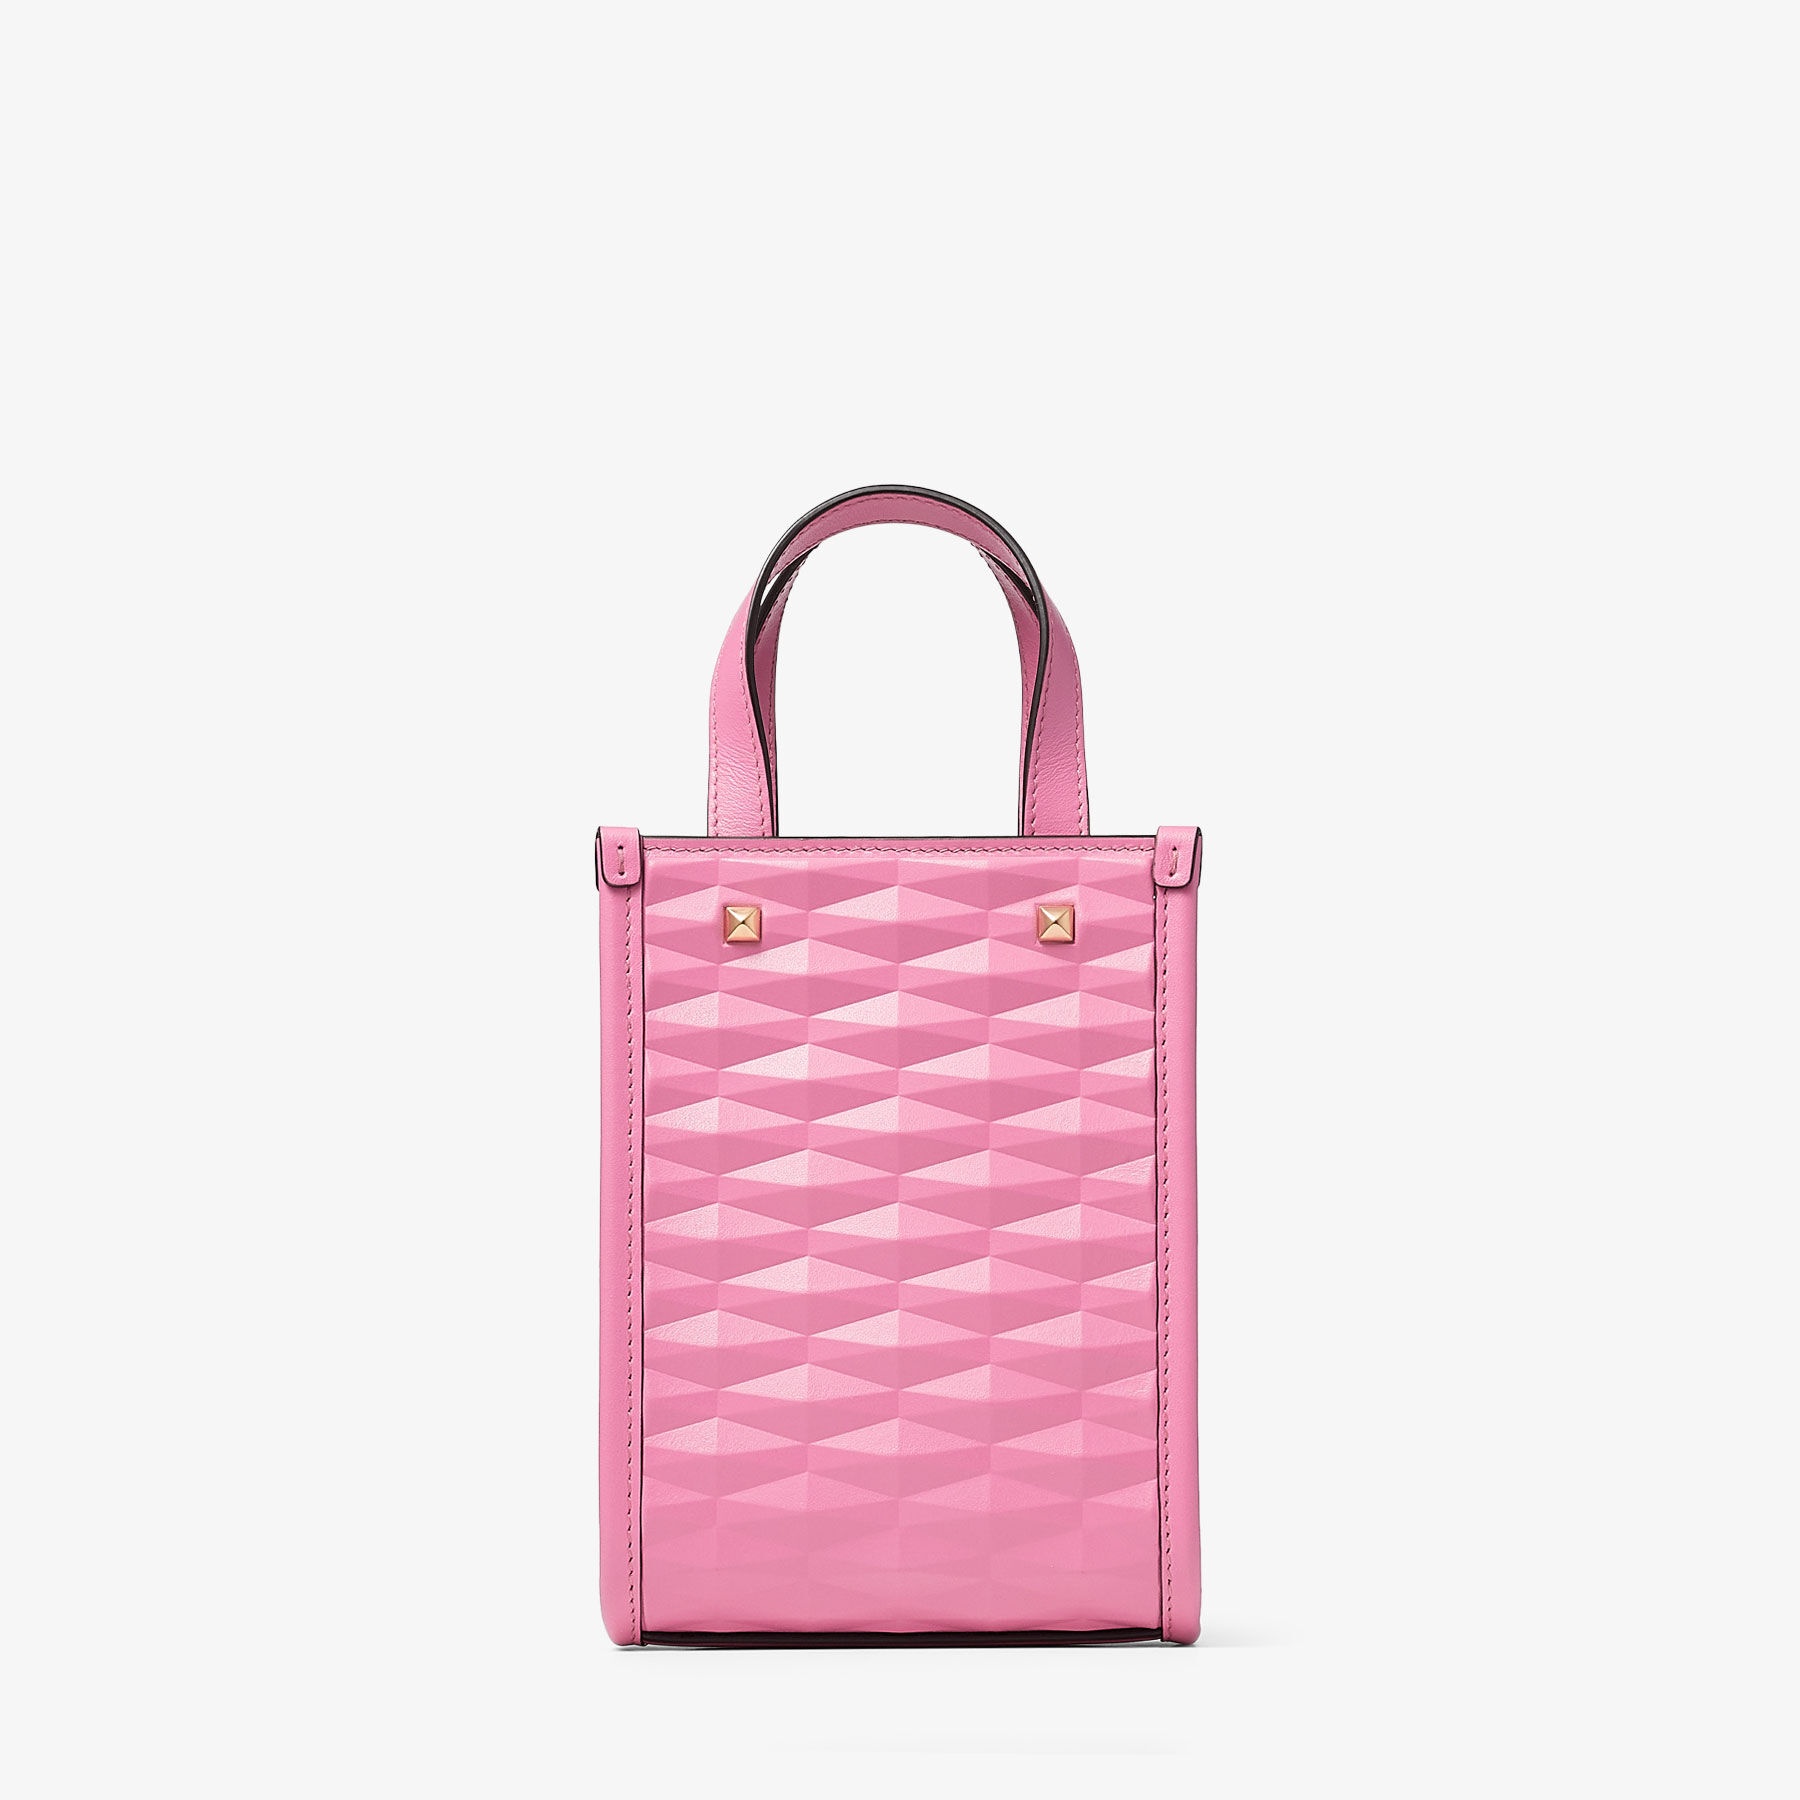 Mini N/S Tote
Candy Pink Diamond Embossed 3D Leather Mini Tote Bag - 6